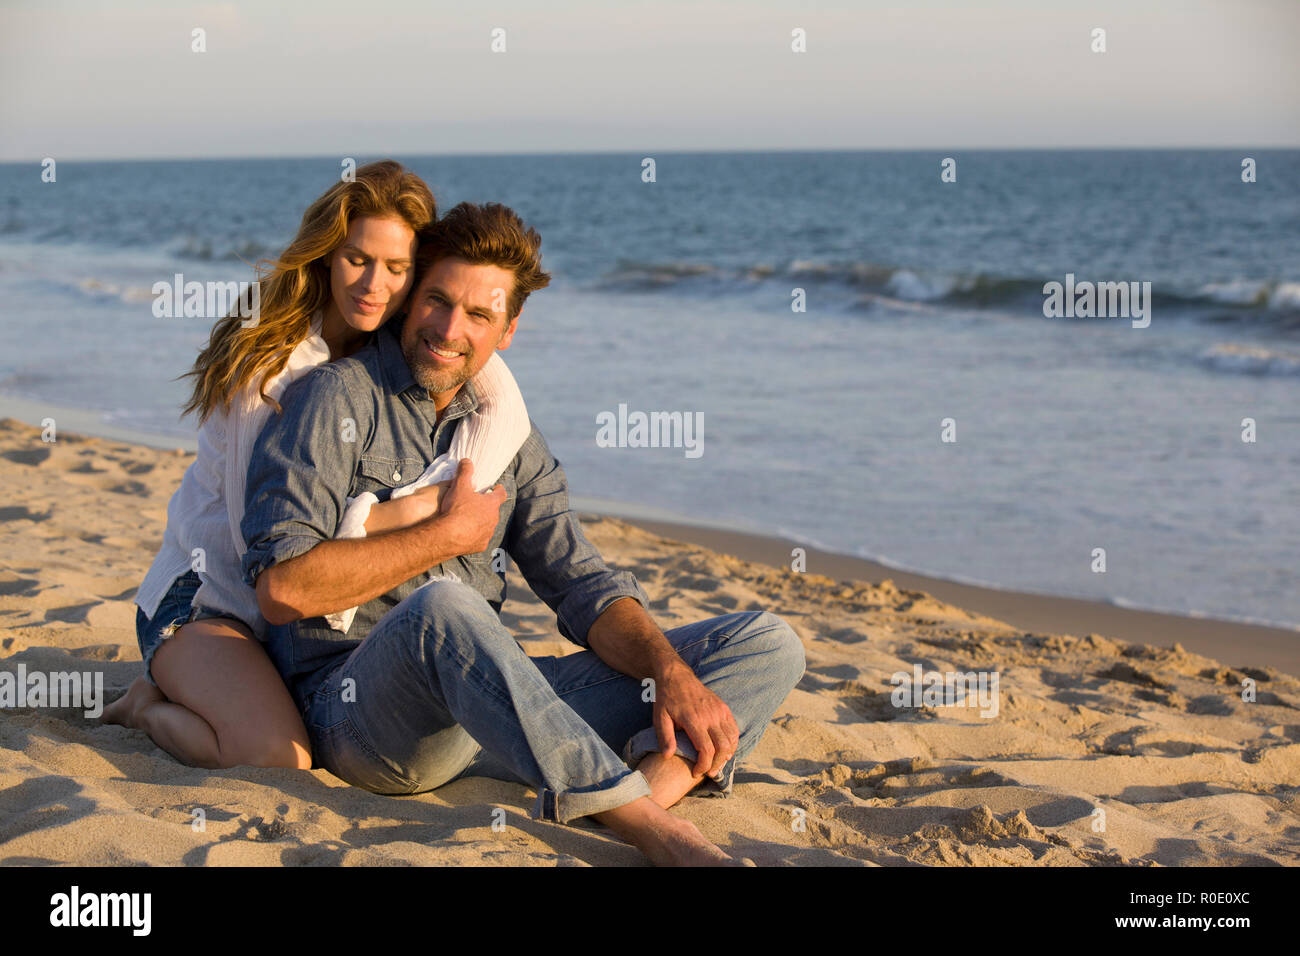 Affectionate Mid-Adult Couple Sitting on Sandy Beach Stock Photo